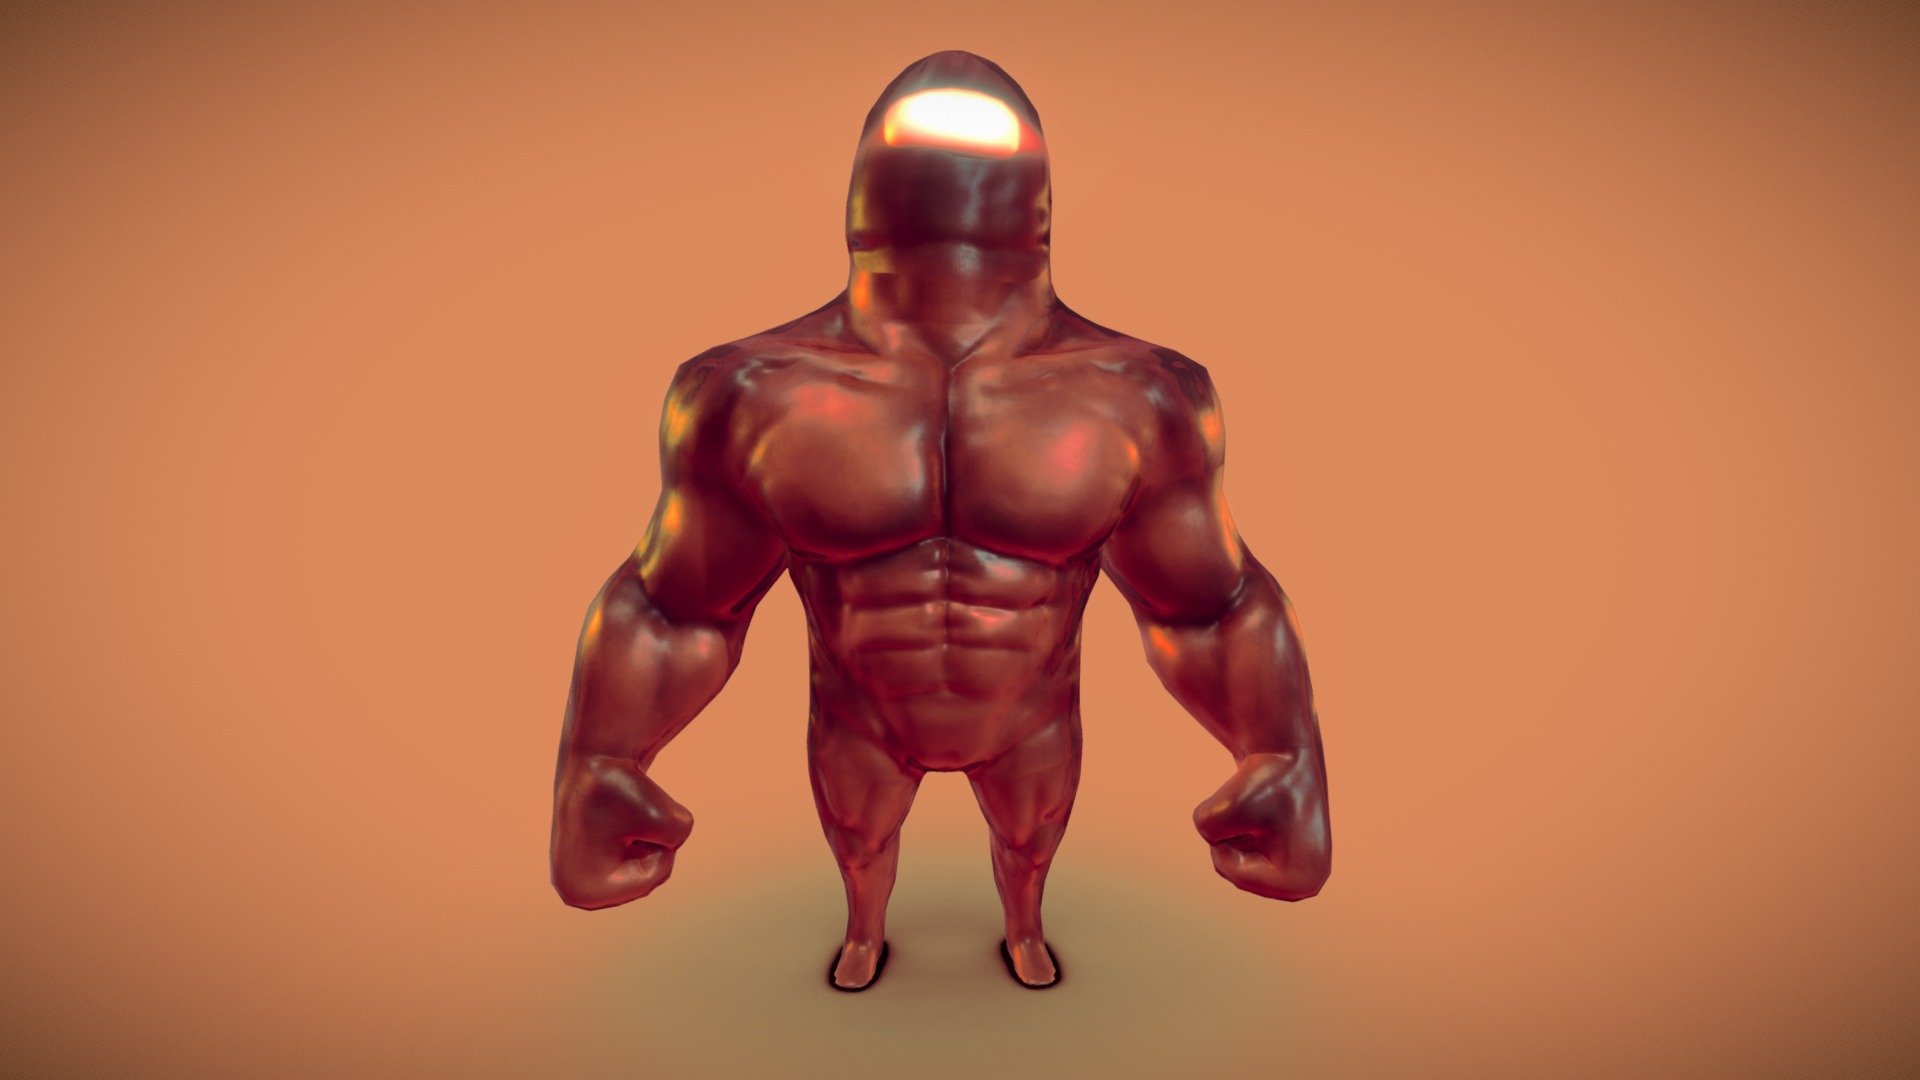 👾👾👾 Mysterious Character enemy boss Rigged
done on blender, inspired from among us characters
ready for you games 
monster - 👾👾 LOWPOLY MONSTER ENEMY AMONG US BOSS - Buy Royalty Free 3D model by haykel-shaba (@haykel1993) 3d model